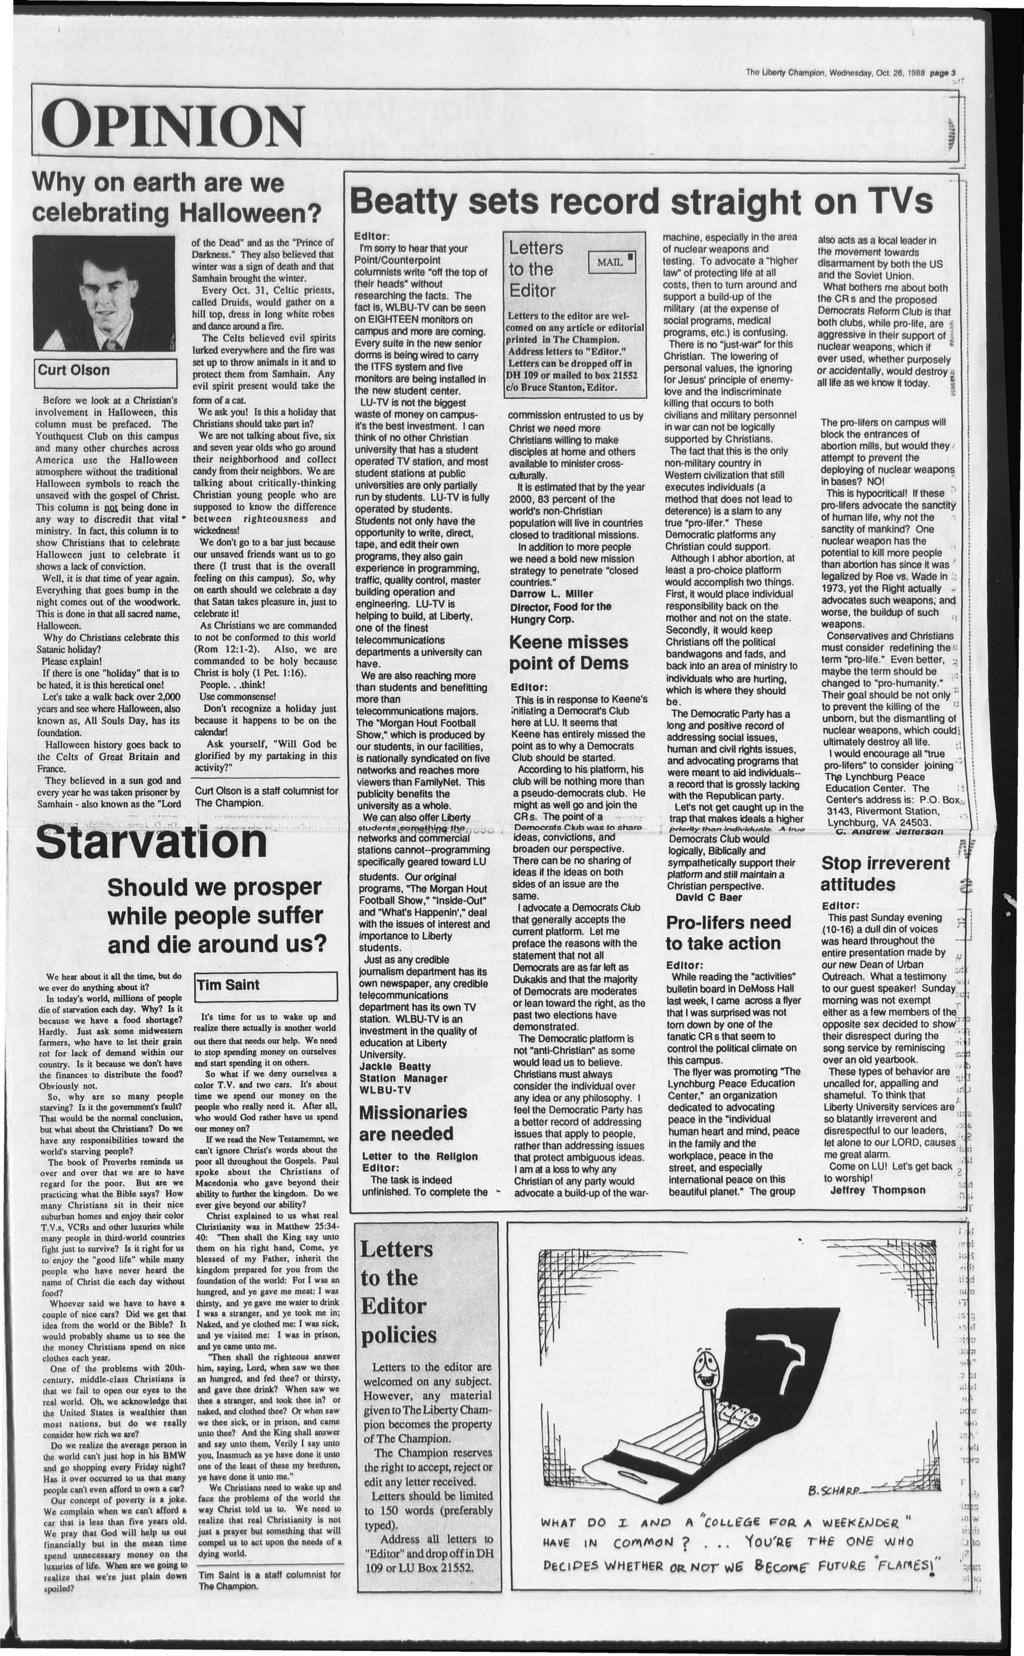 The Lberty Champon, Wednesday, Oct 26, 1988 page 3 Why on earth are we celebratng Halloween? Before we look at a Chrstan's nvolvement n Halloween, ths column must be prefaced.